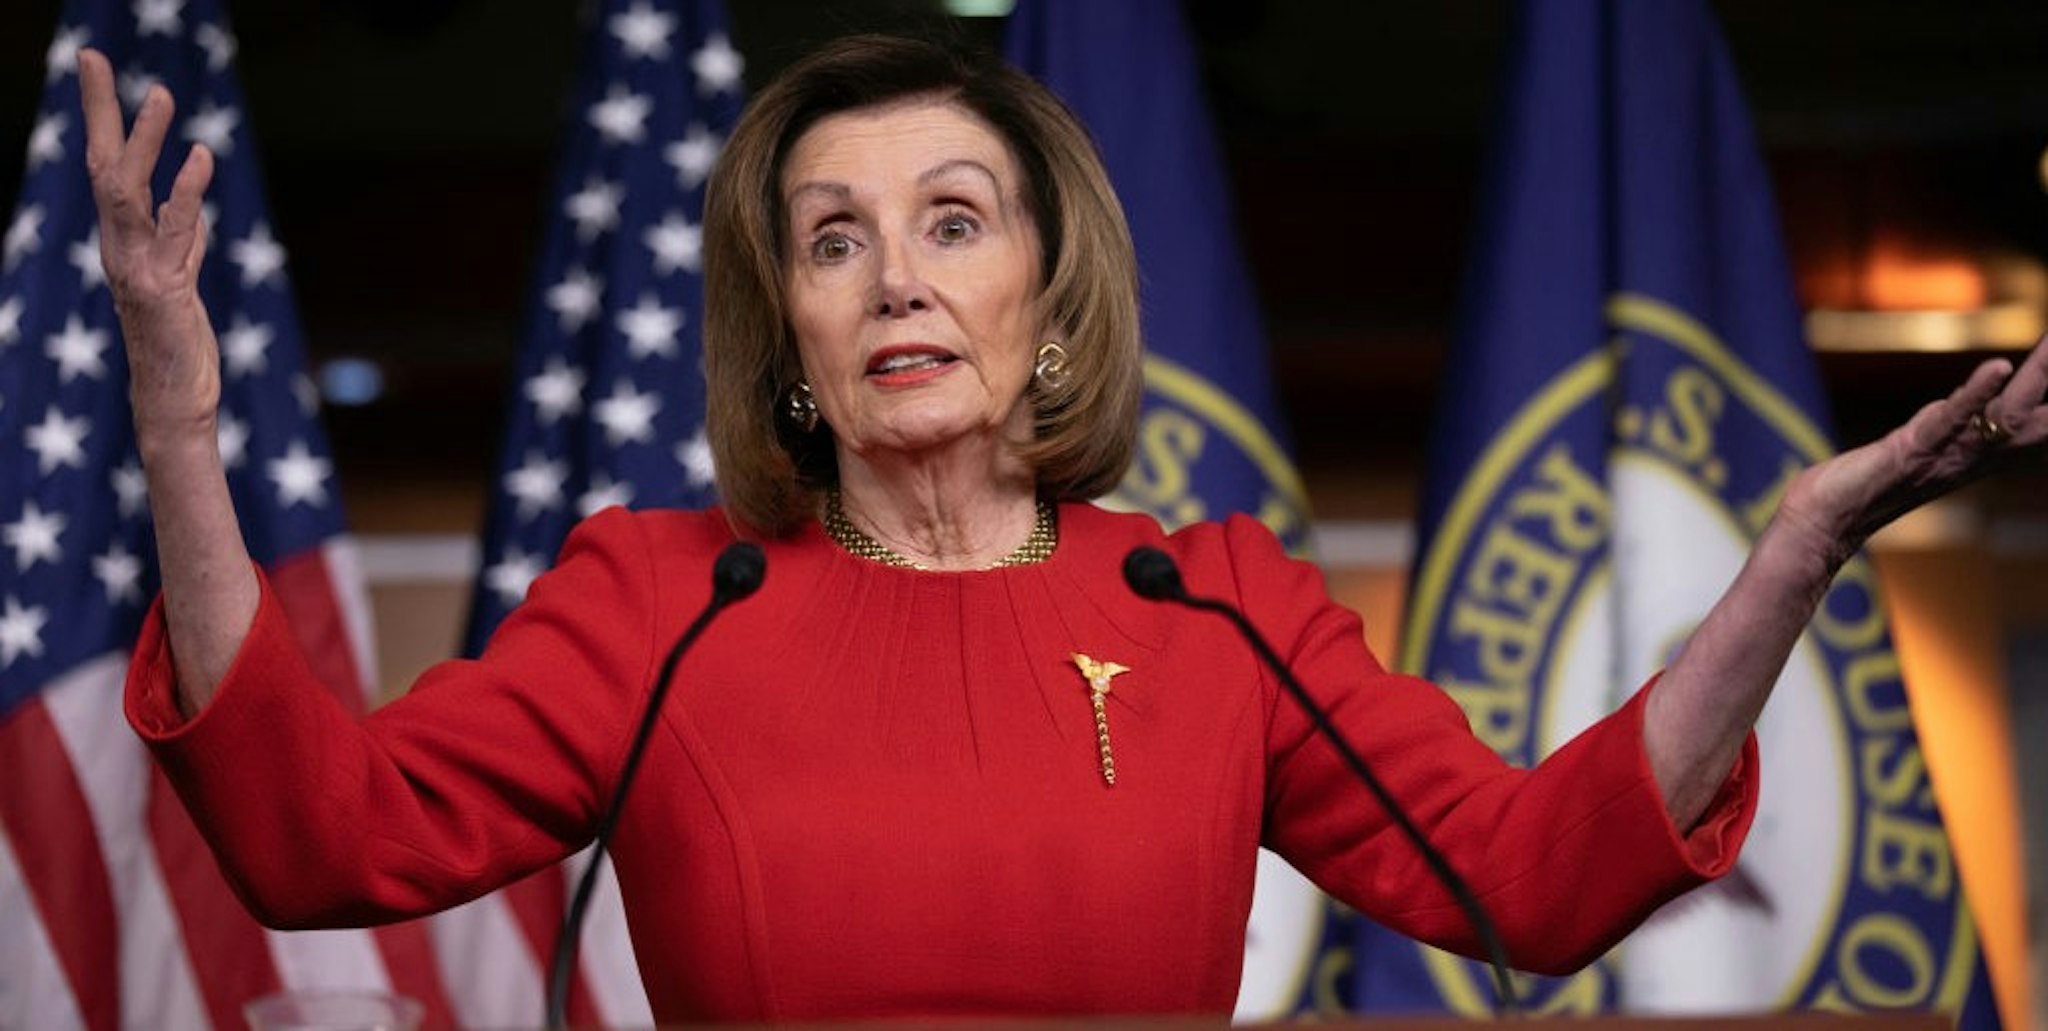 U.S. House Speaker Nancy Pelosi (D-CA) talks about the remaining legislative business and the House of Representatives vote to impeach U.S. President Donald Trump during her final weekly news conference of 2019 at the U.S. Capitol in Washington, U.S., December 19, 2019.